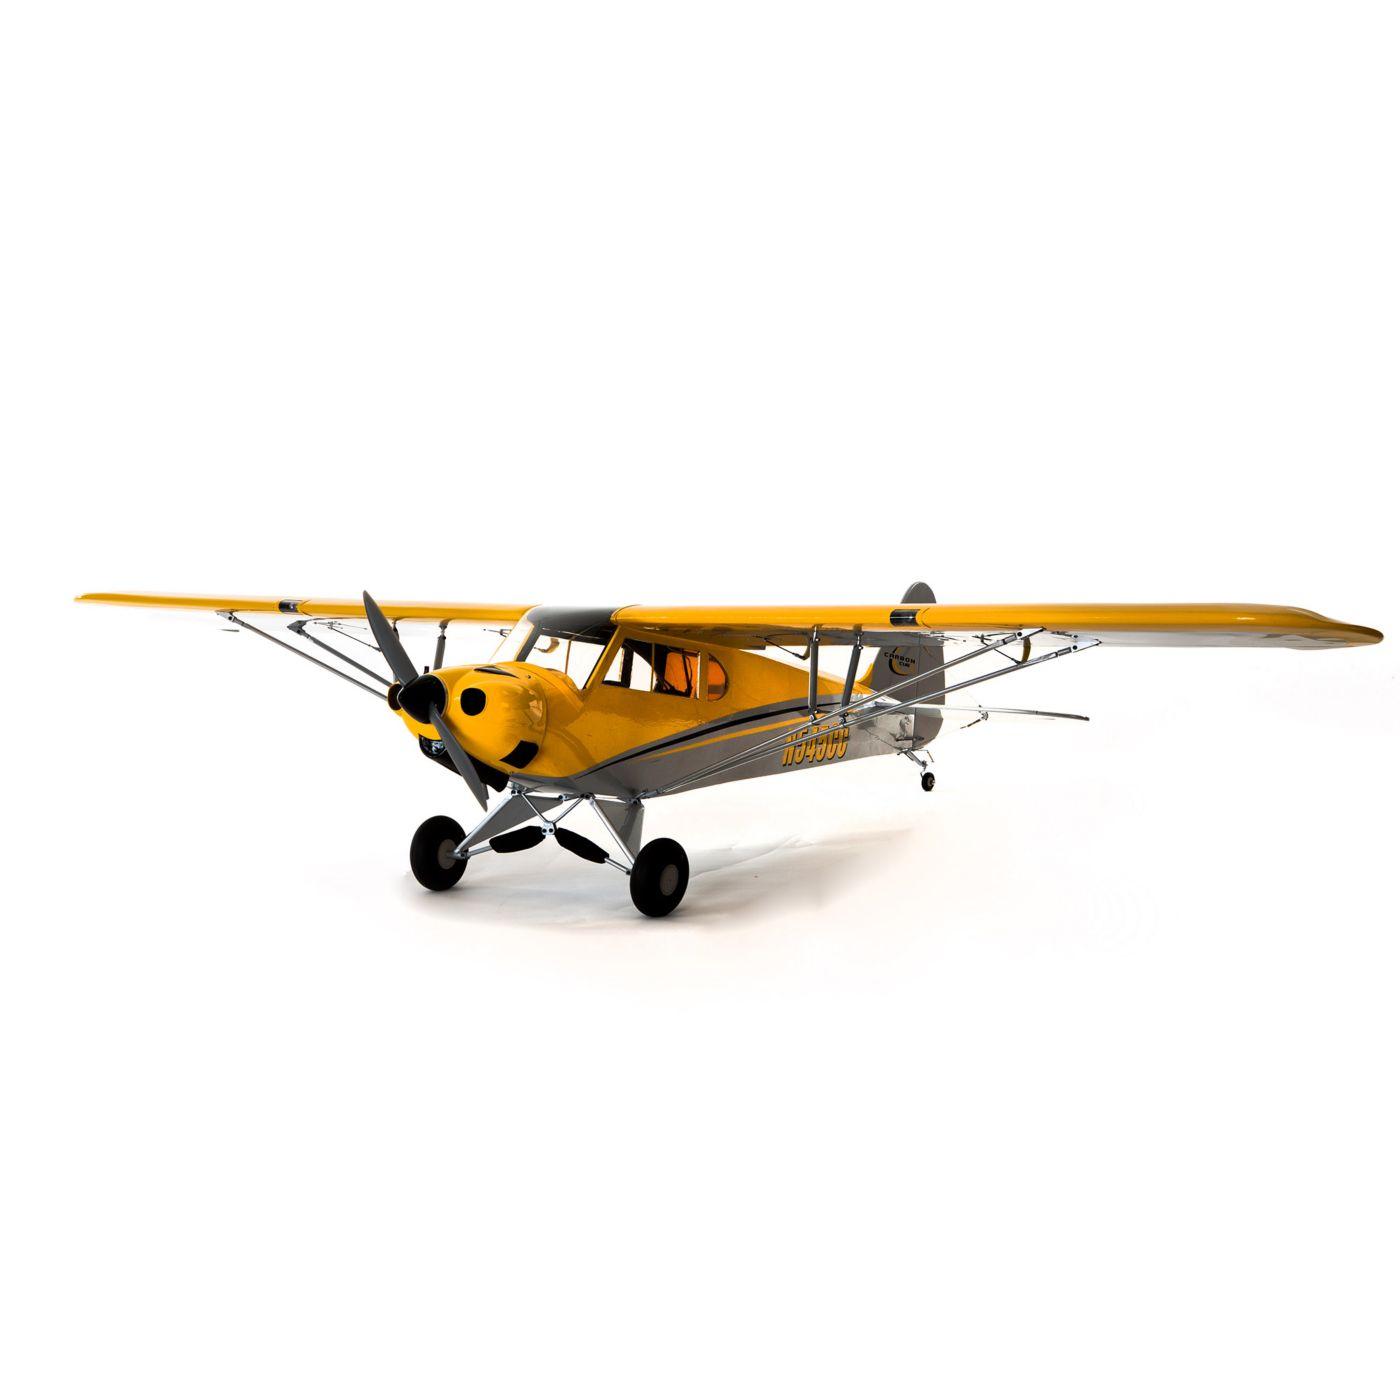 Piper Cub Rc Plane For Sale: Possible subheading: Considerations when purchasing a Piper Cub RC plane